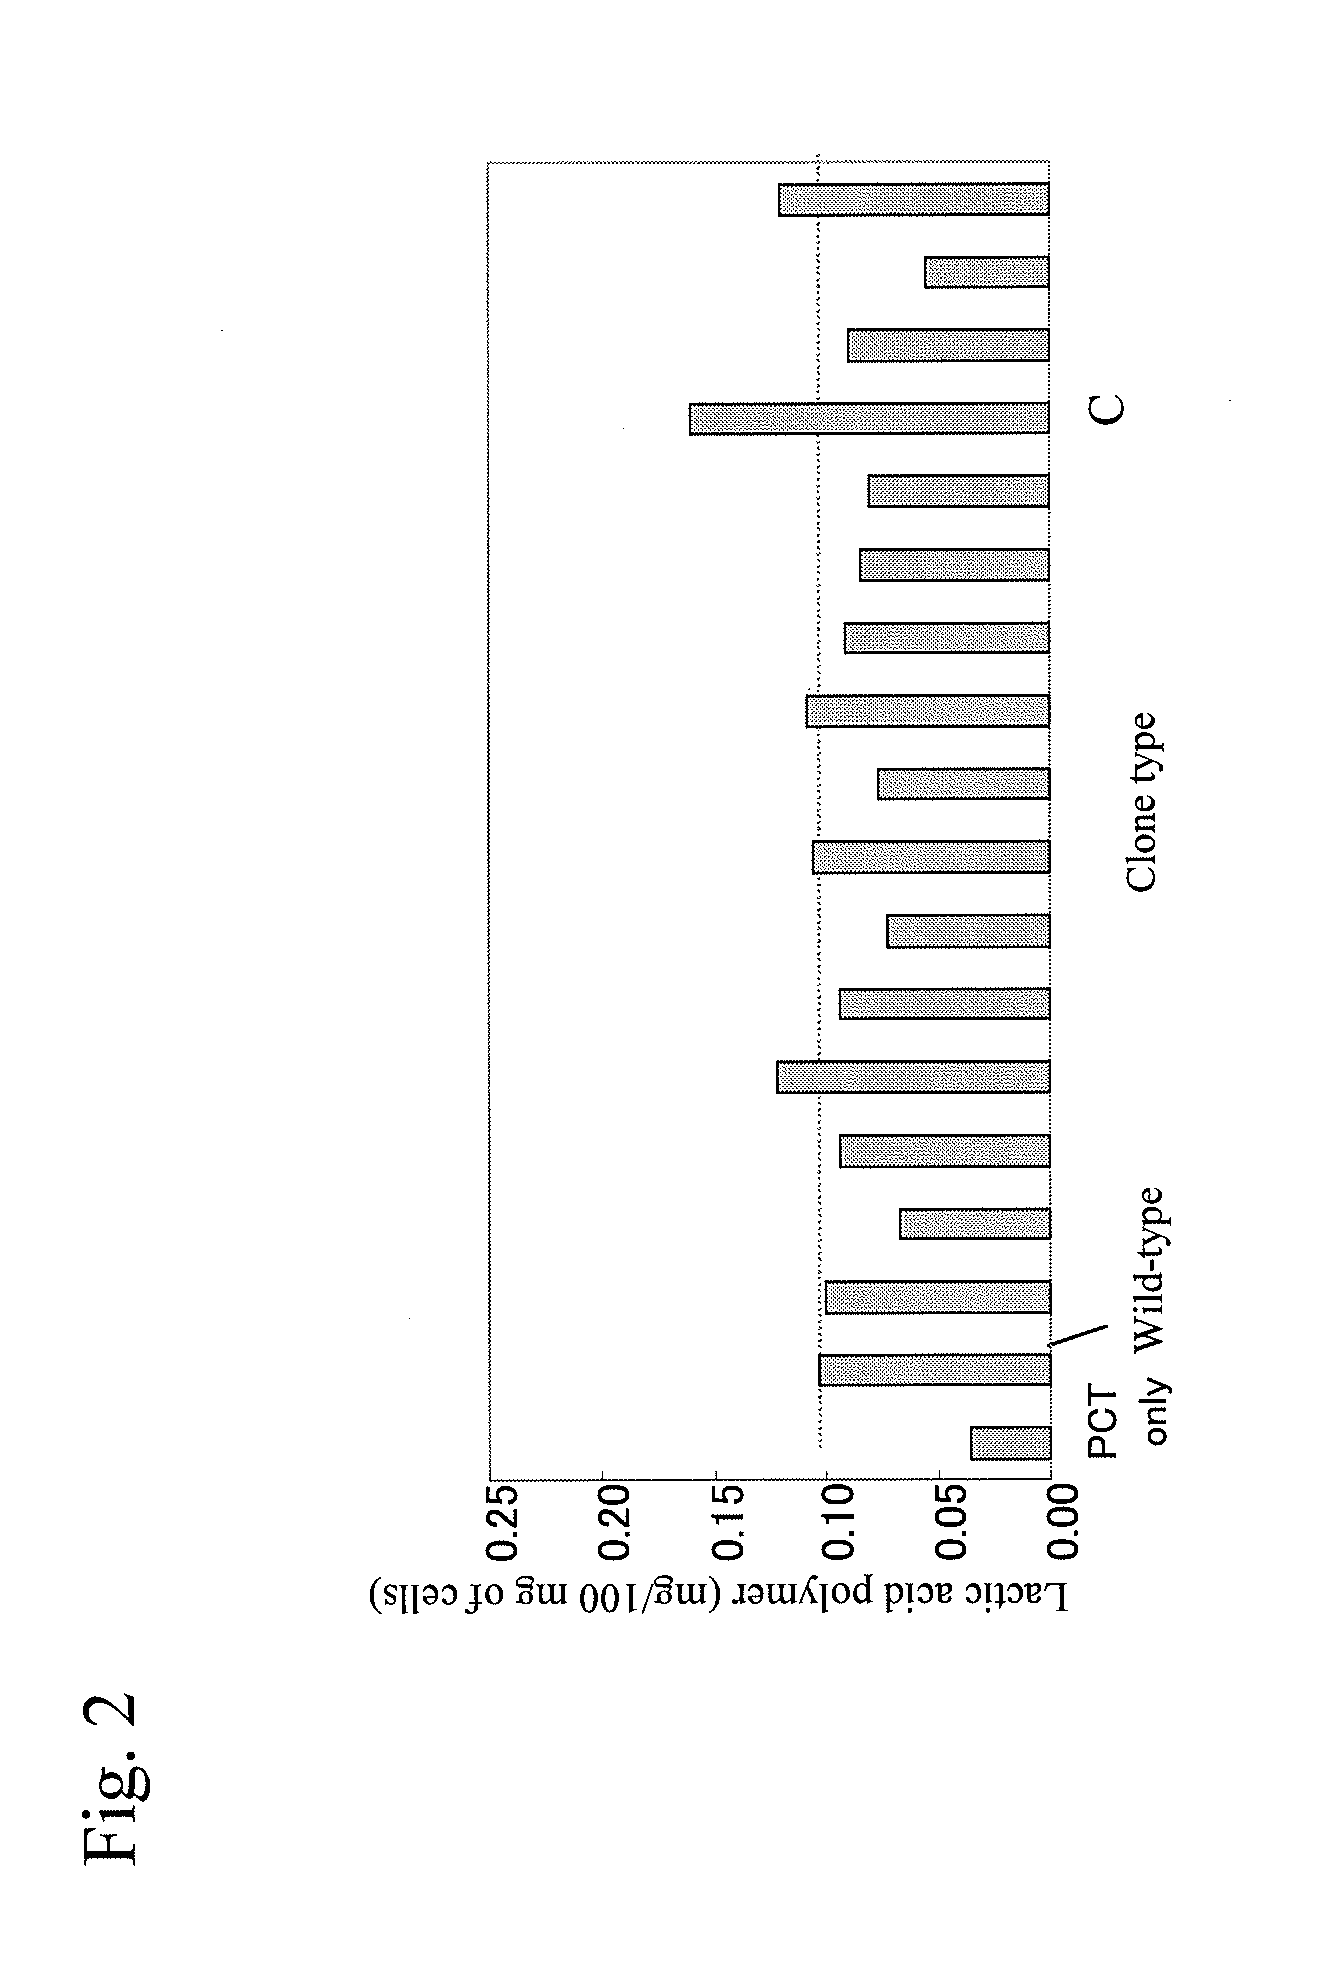 Mutant polyhydroxyalkanoic acid synthase gene and method for producing aliphatic polyester using the same